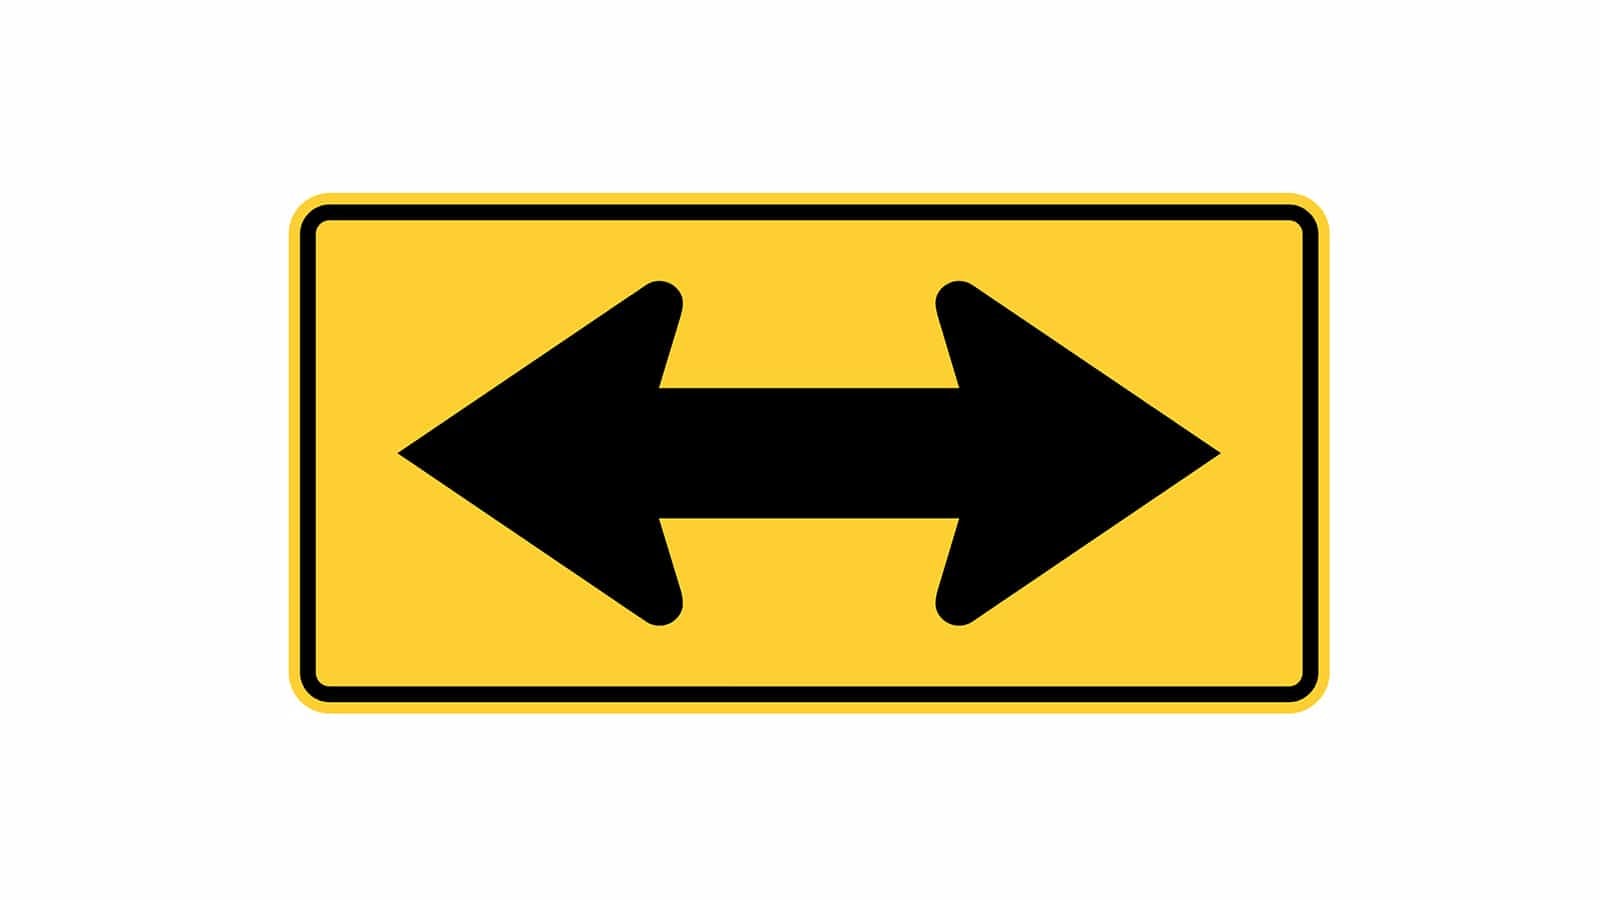 Warning sign Two Directional Arrow